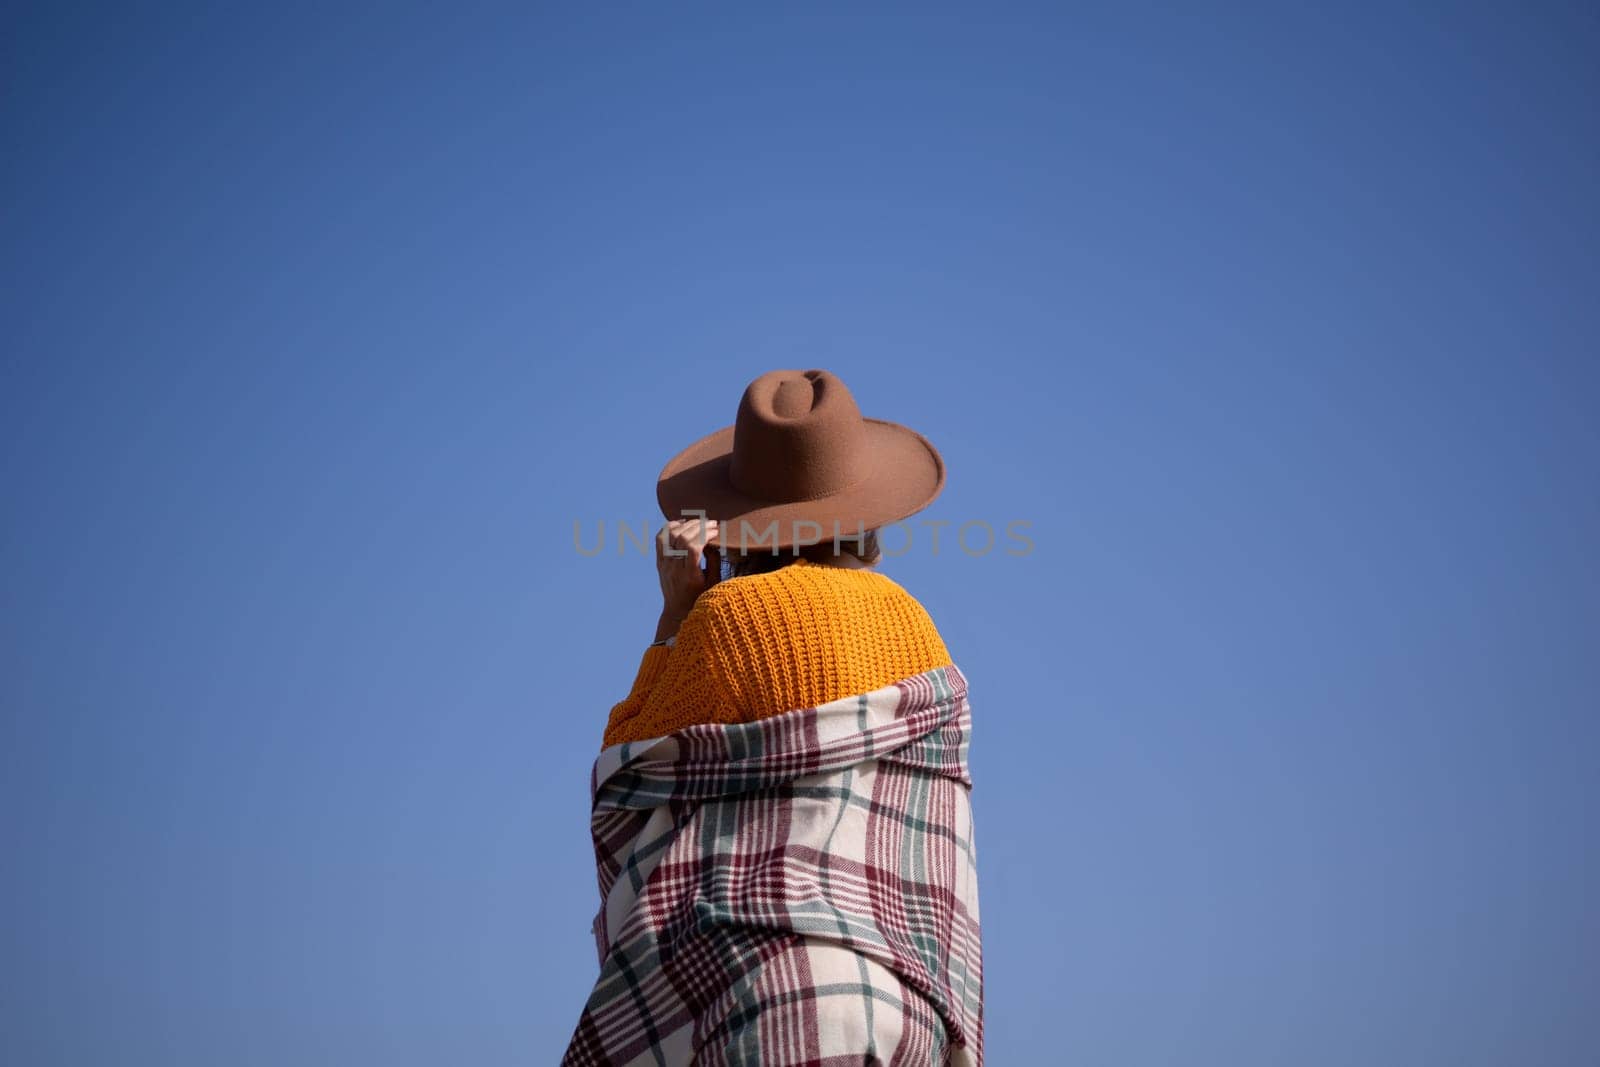 A woman wearing a brown hat and a plaid blanket stands in front of a blue sky. Concept of warmth and comfort, as the woman is wrapped in a cozy blanket